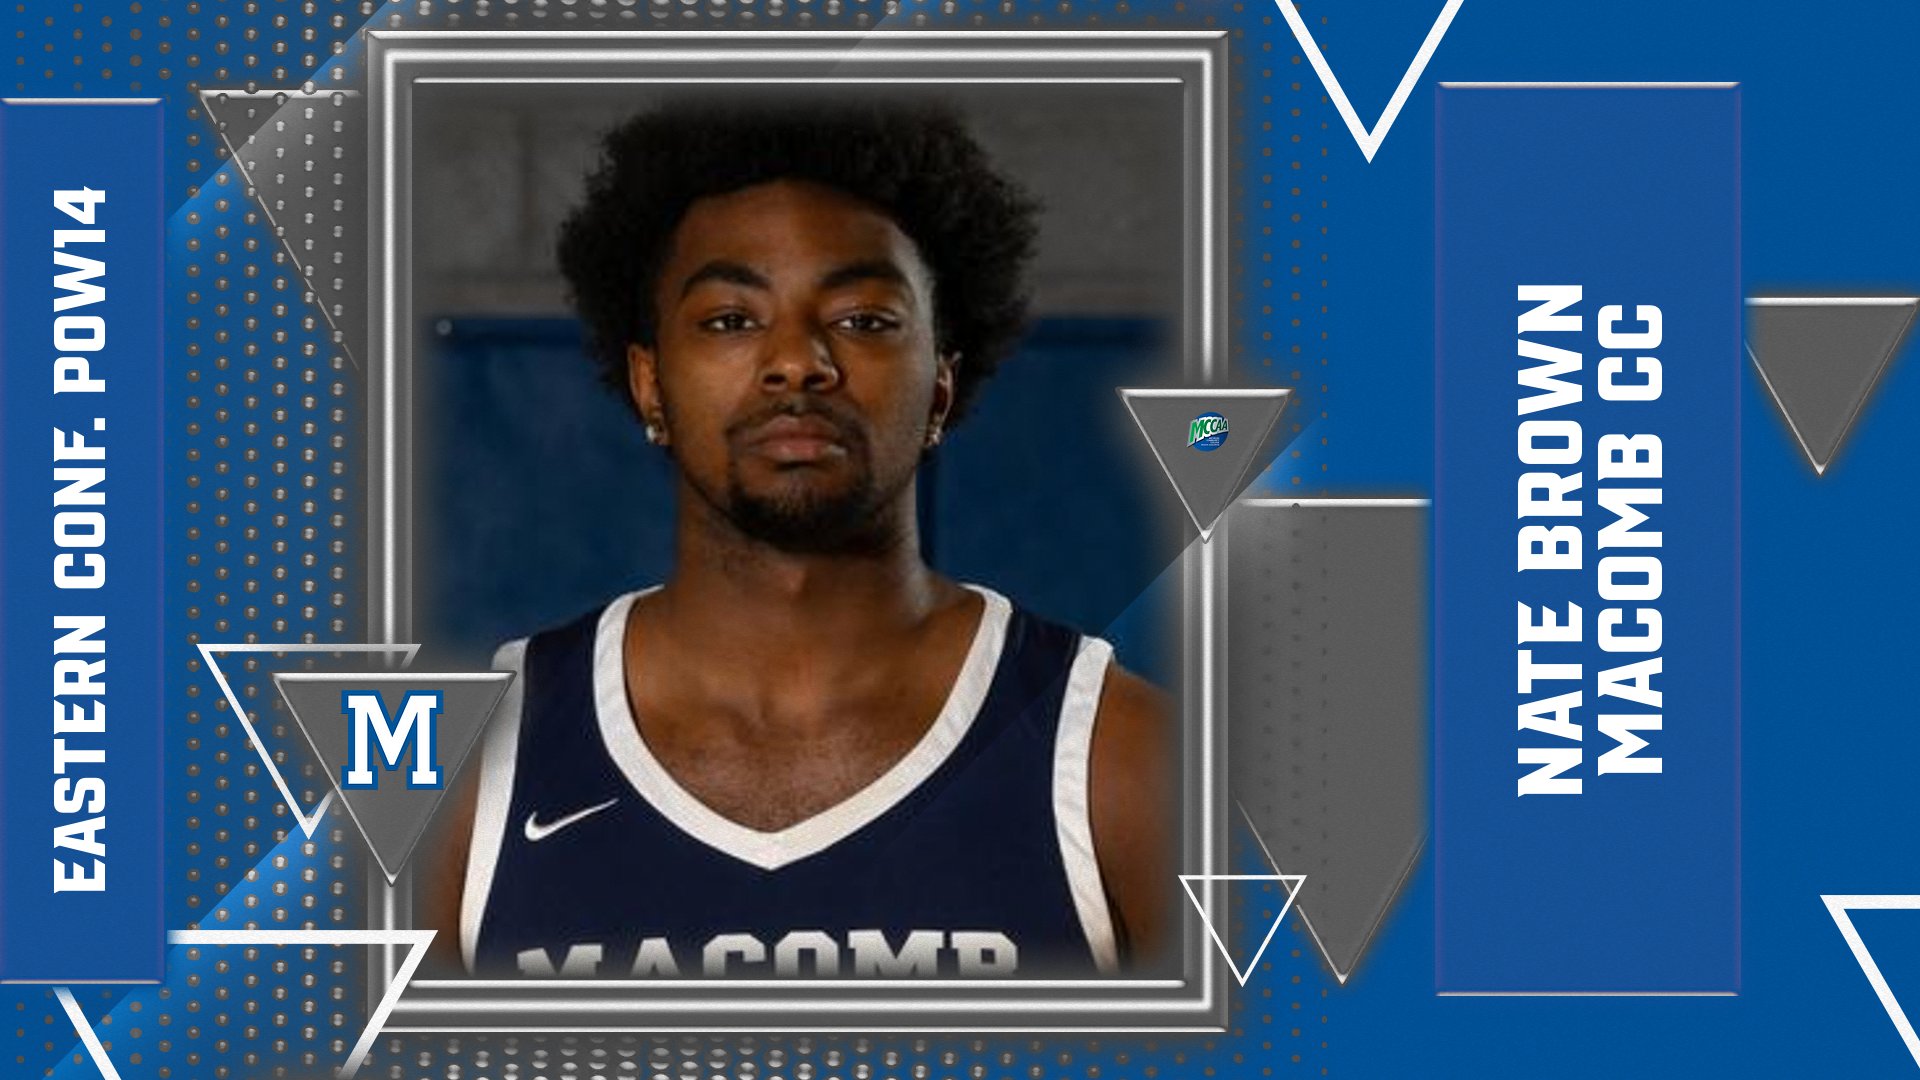 Macomb's Brown Named MCCAA Eastern Conference Men's Basketball Player of the Week14